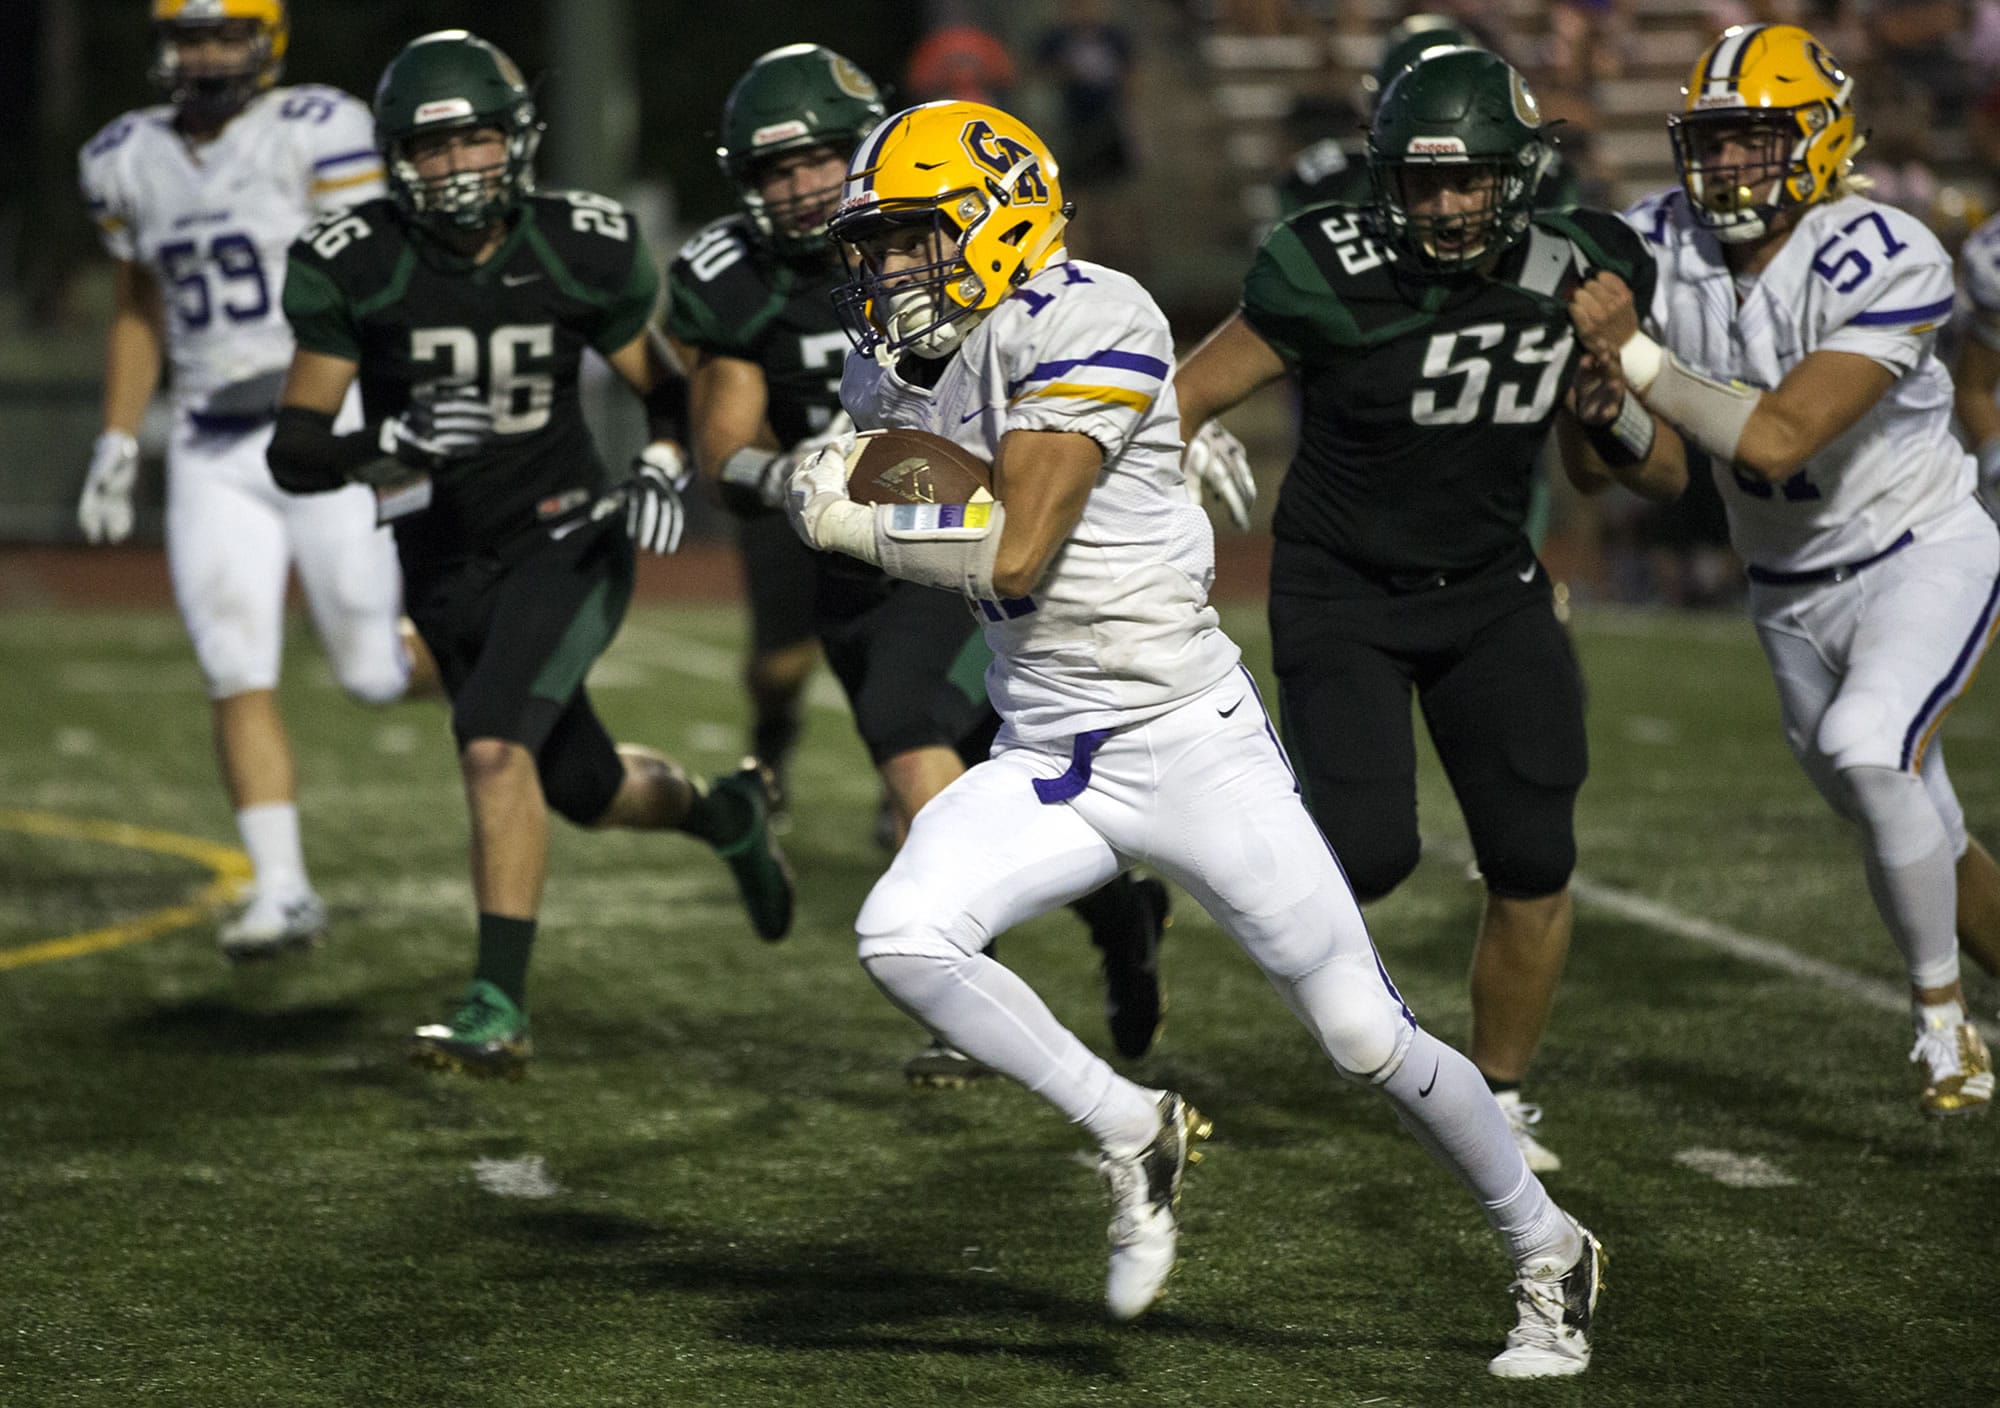 Chieftain Jarrett Seelbinder (17) makes a run during their Friday night football game between Columbia River and Evergreen High School at McKenzie Stadium in Vancouver on Friday, Sept. 1, 2017. The Plainsmen beat the Cheiftains 26 to 13.